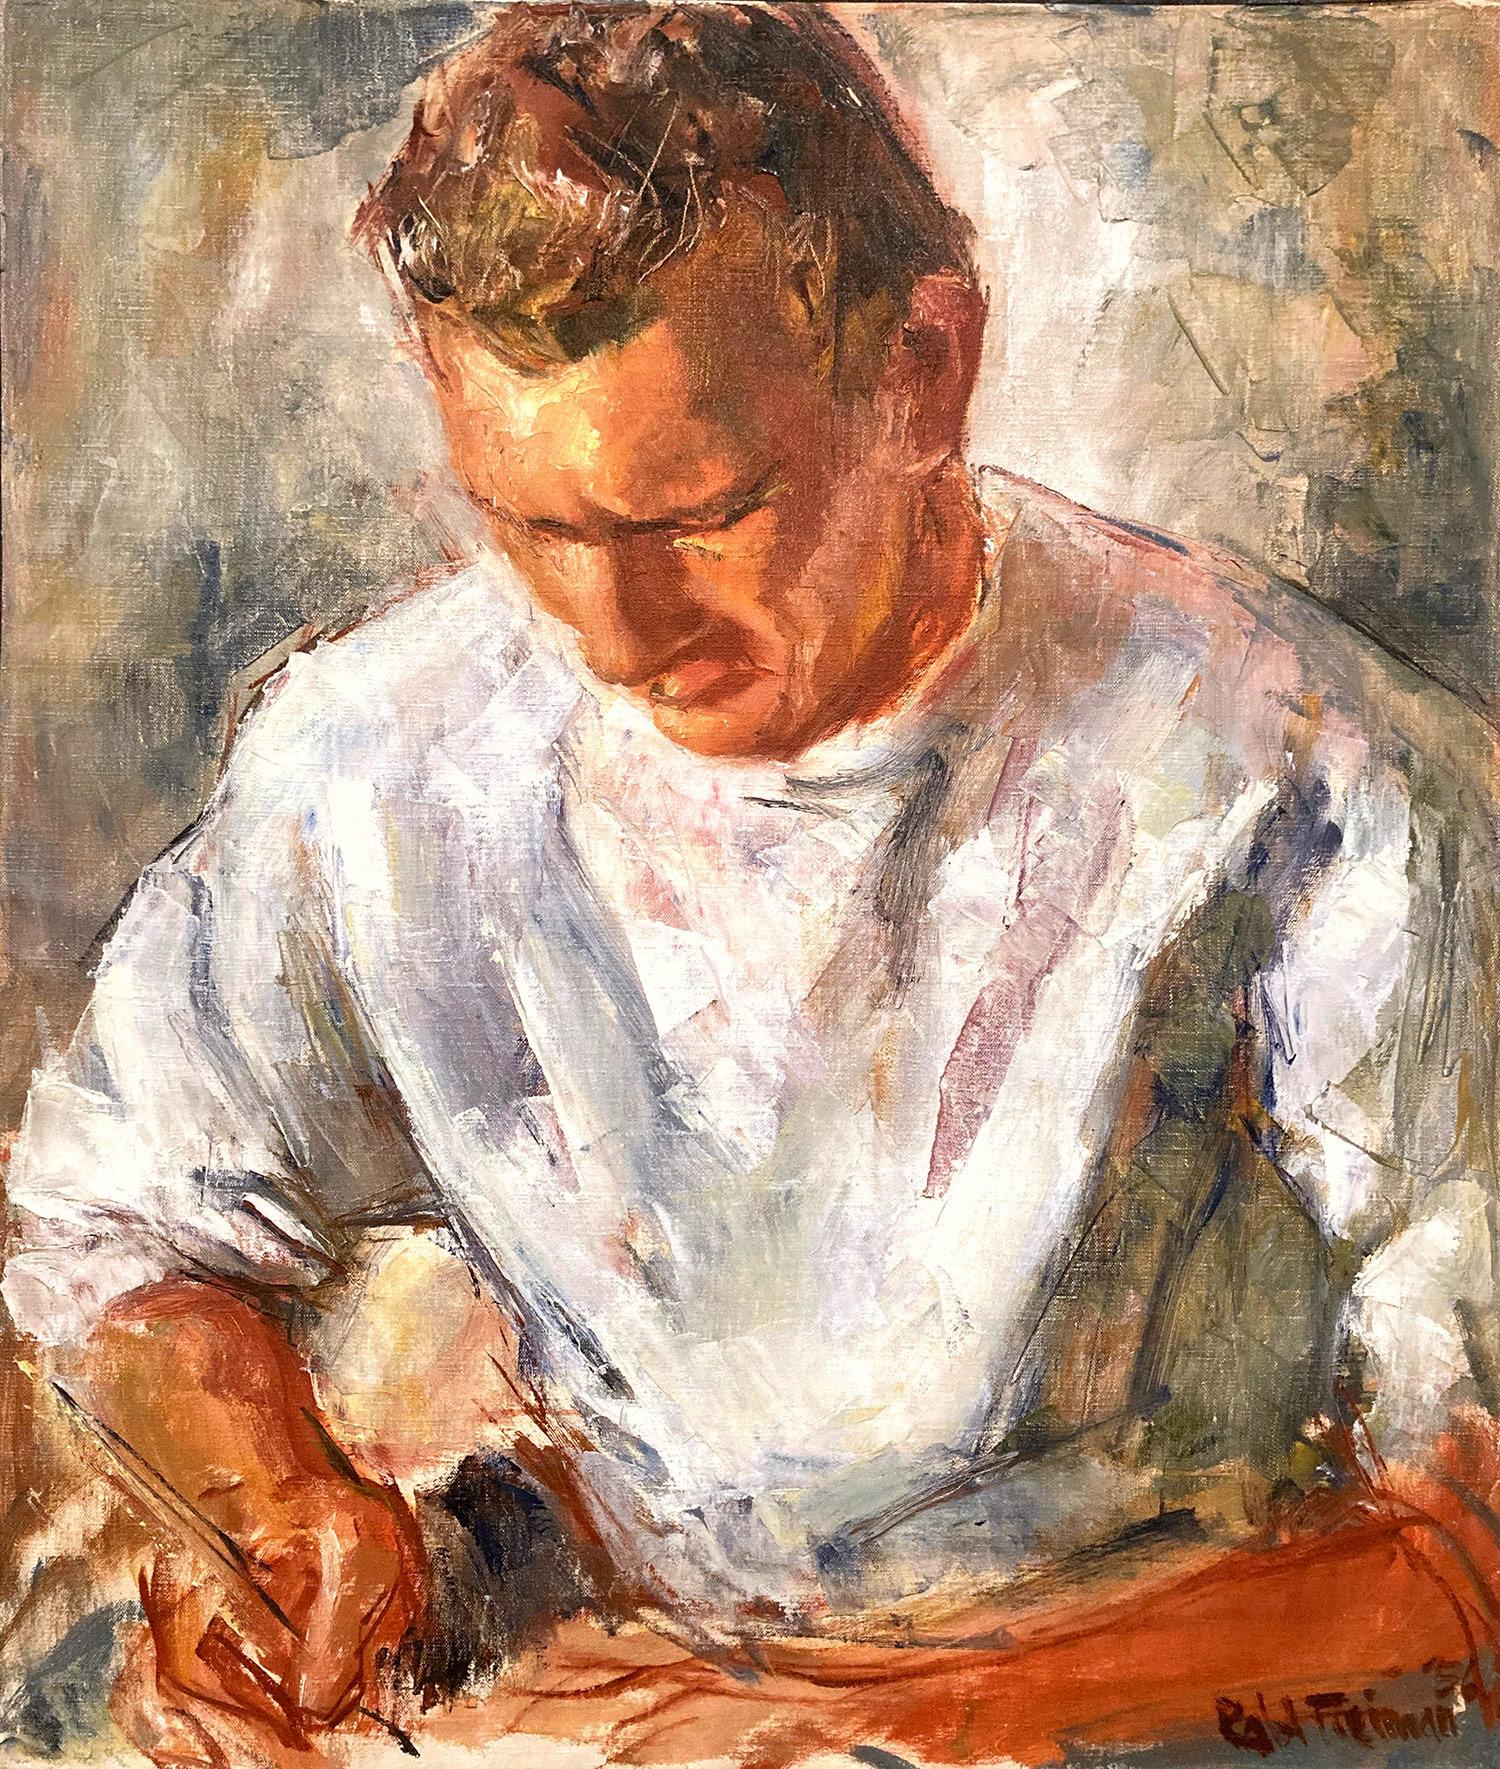 Robert Freiman Figurative Painting - "Portrait of a Man Writing" American Mid-20th Century Oil Painting on Canvas